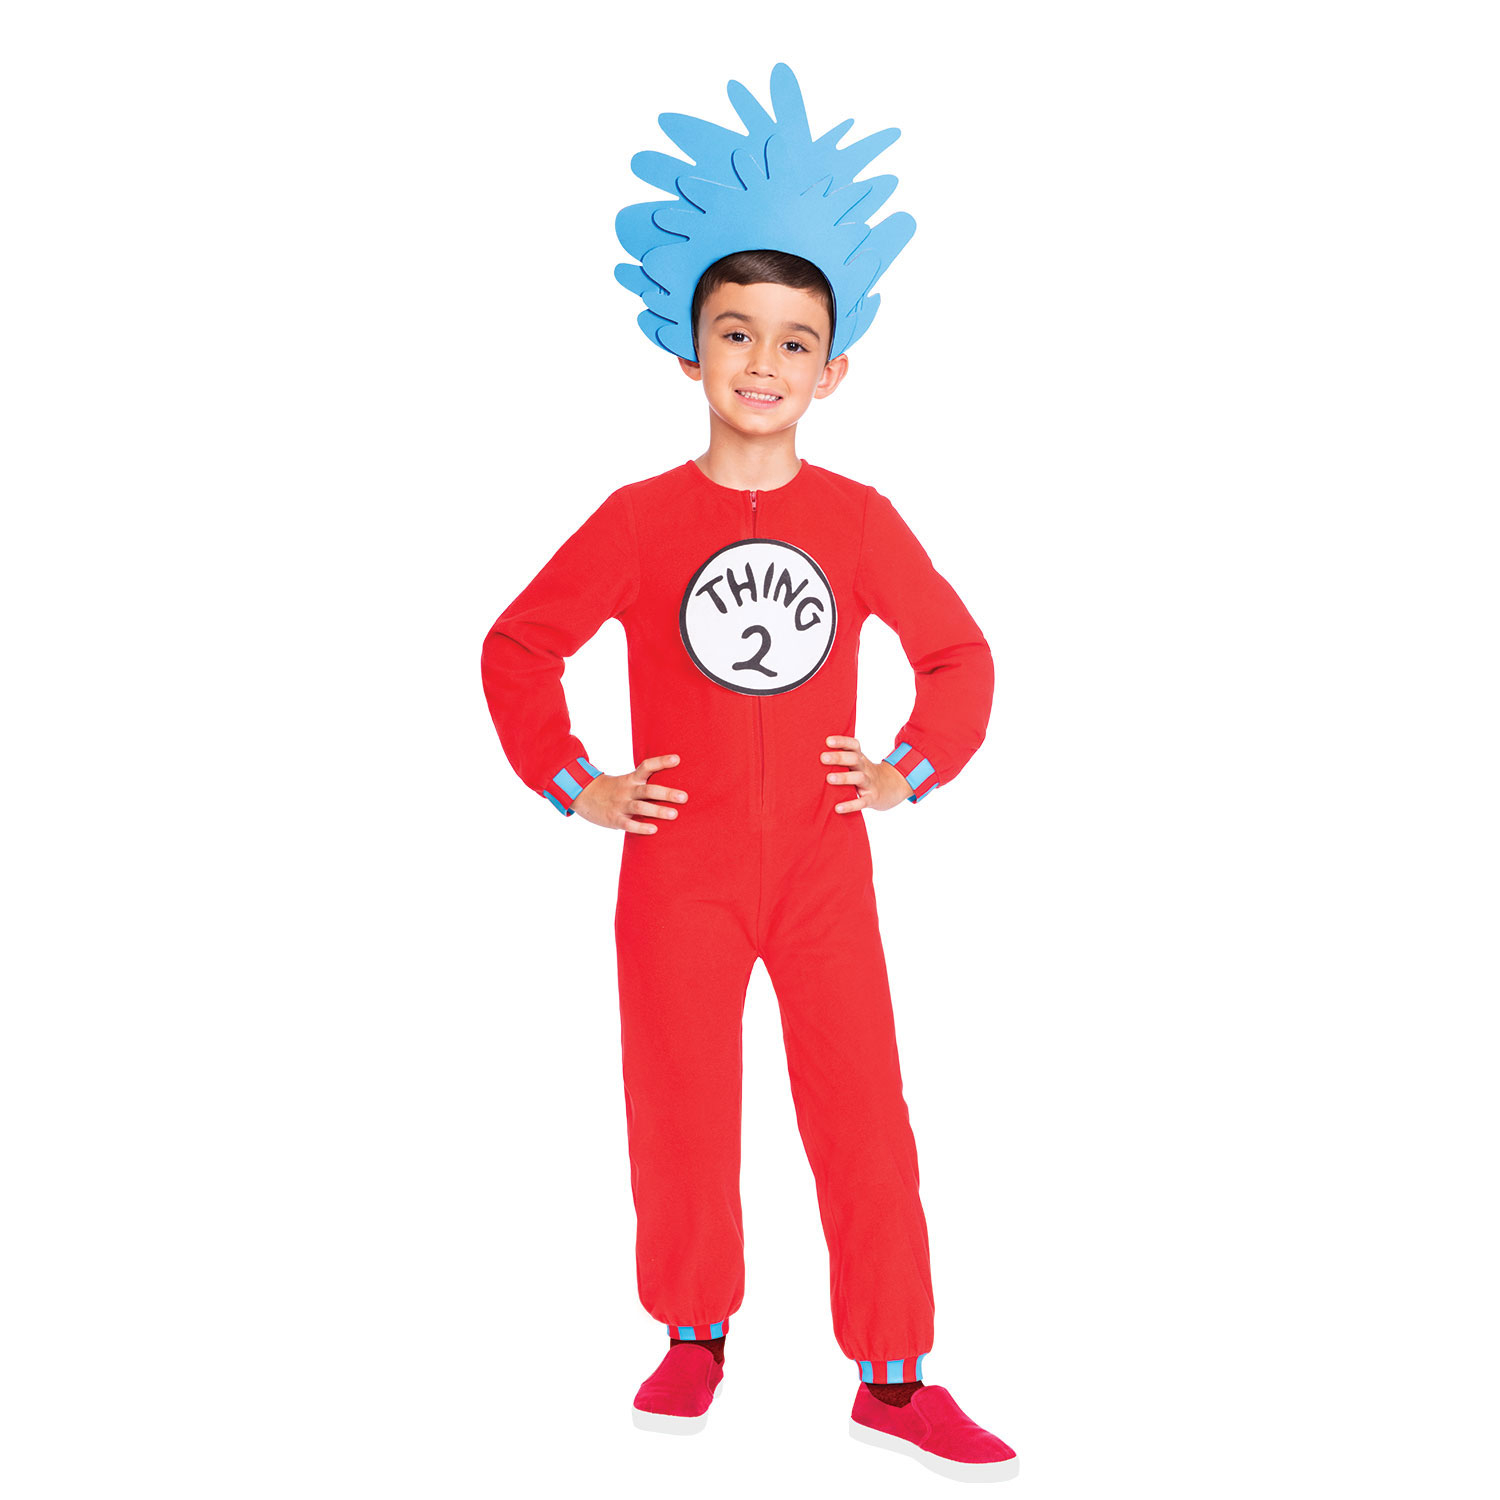 Thing 1 & 2 Licensed Jumpsuit Fancy Dress Costume 4-6 years Amscan 9904207 Childs Official Dr Seuss